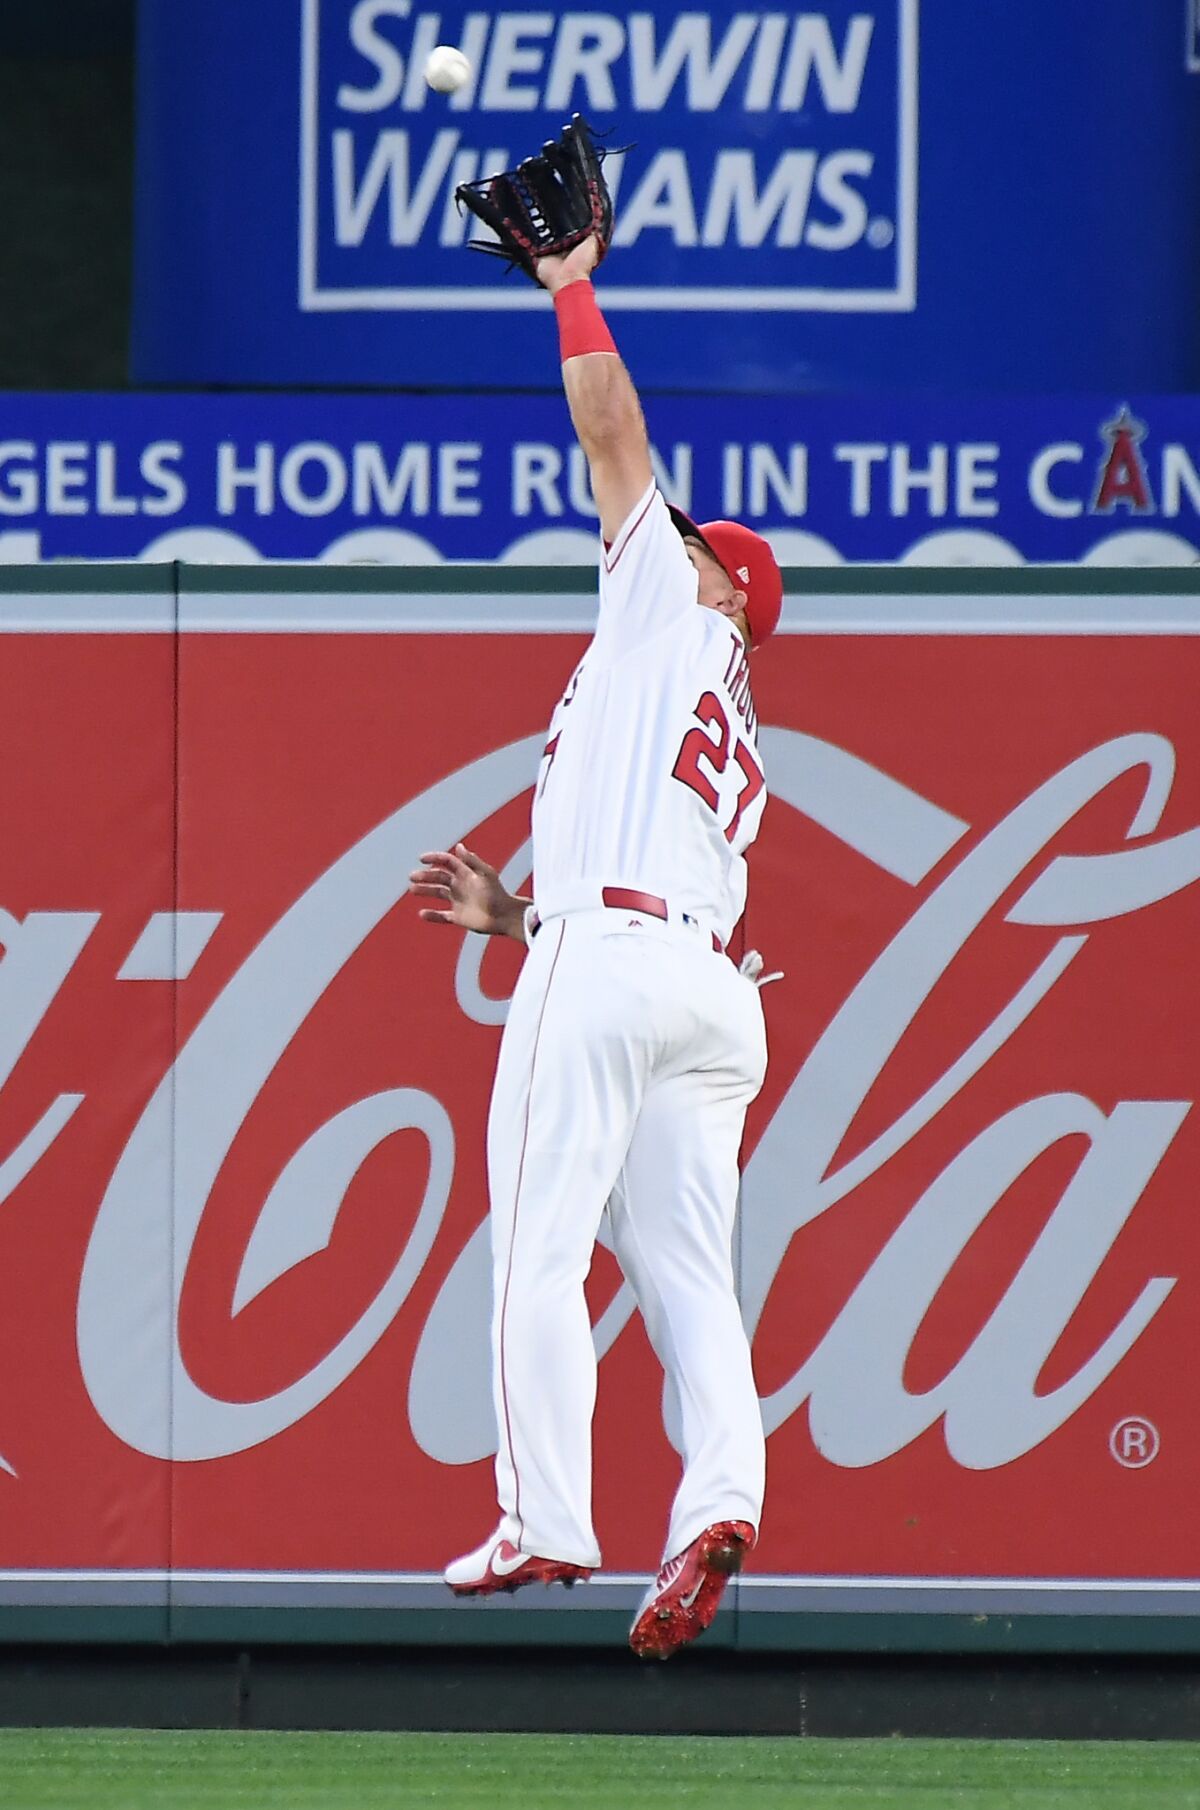 Angeles center fielder Mike Trout makes a catch off the bat of Indians batter Francisco Lindor inthe 1st inning.